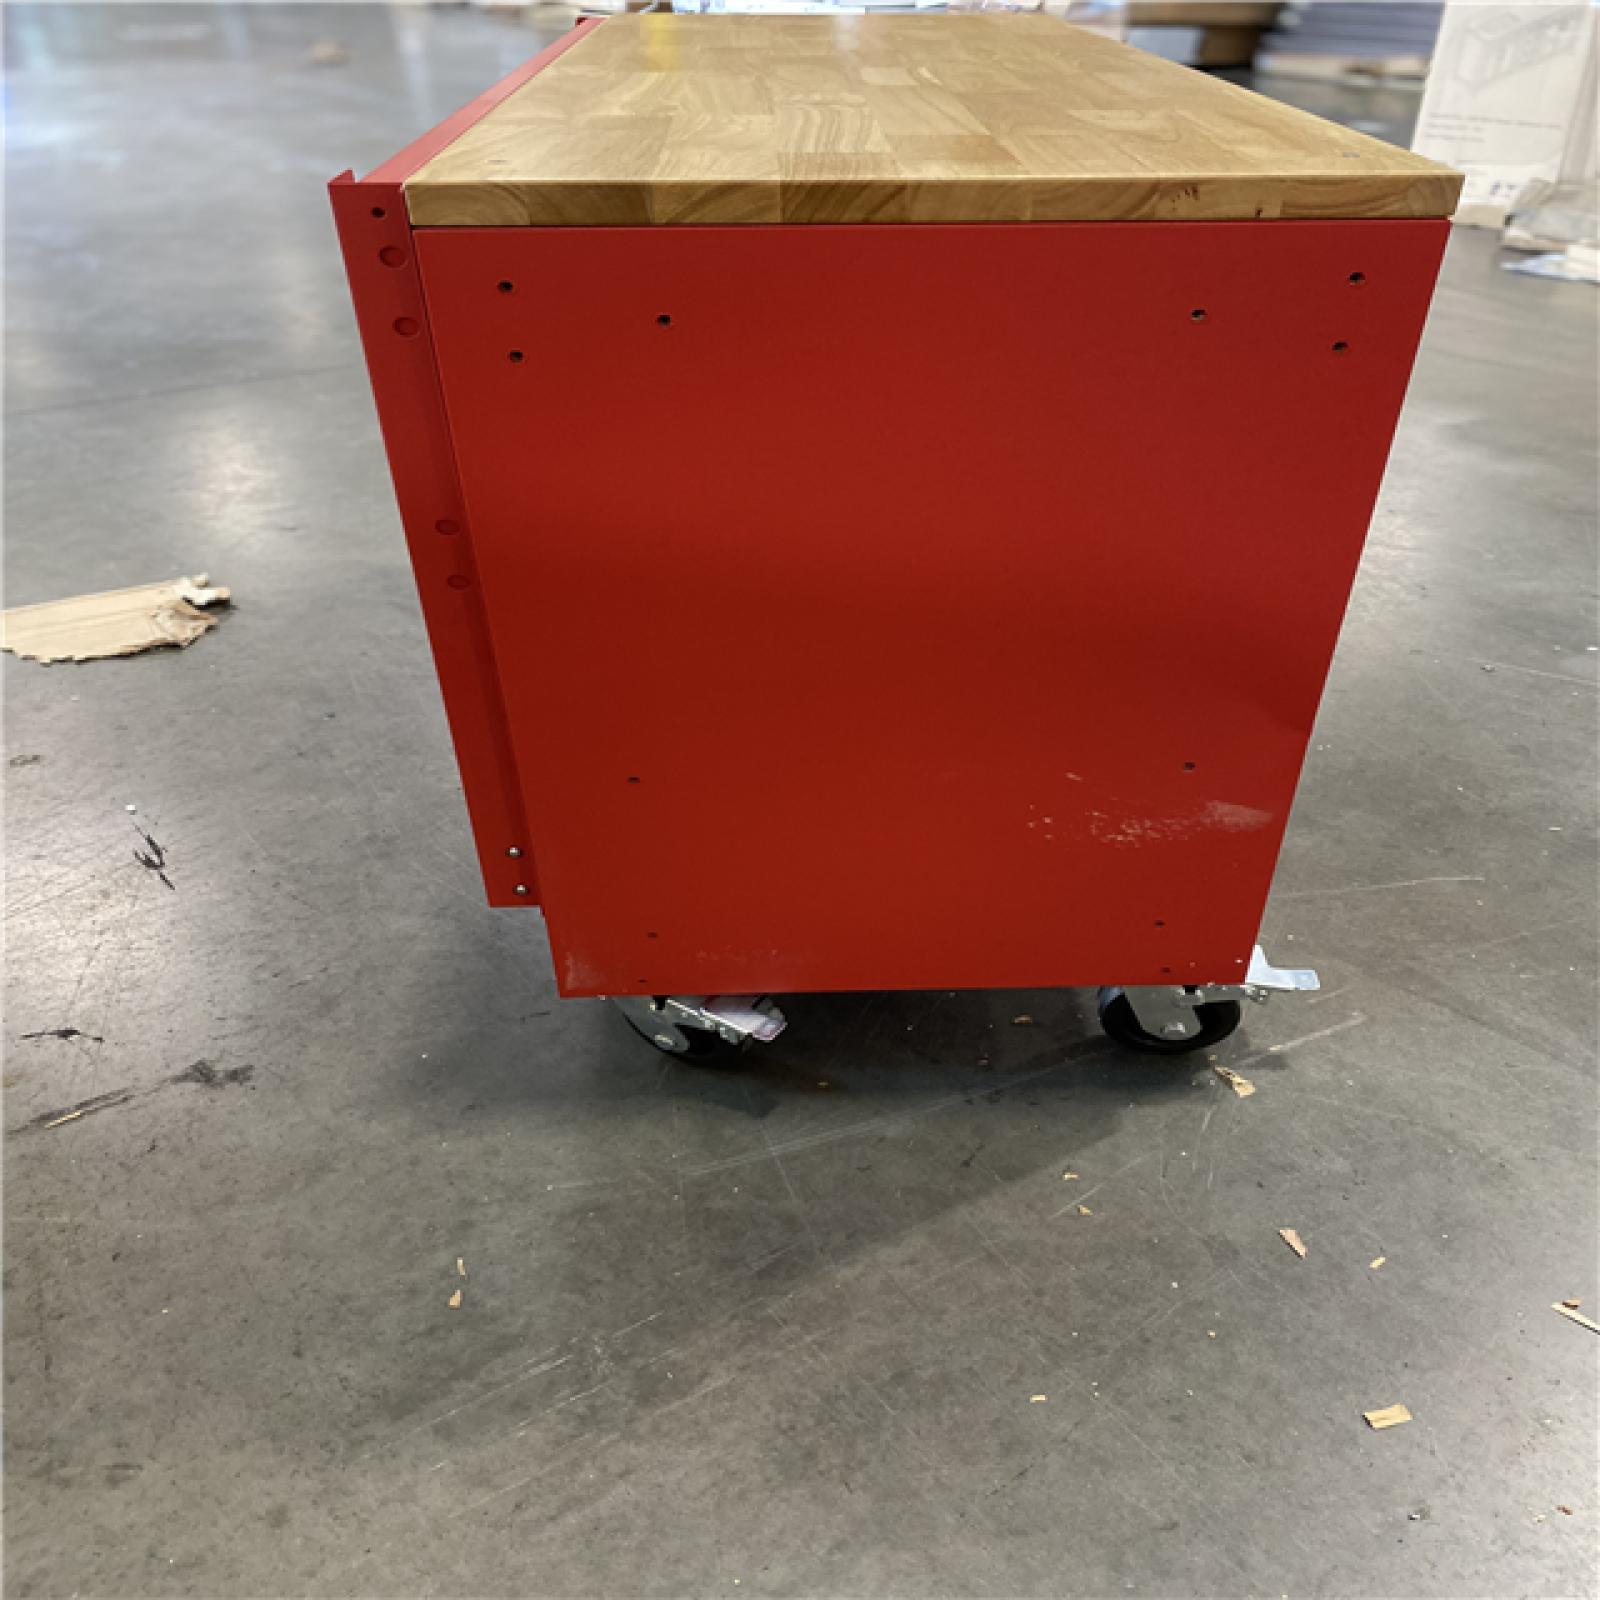 DALLAS LOCATION - Milwaukee 61 in. 11-Drawer/1-Door 22 in. D Mobile Workbench with Sliding Pegboard Back Wall in Red/Black